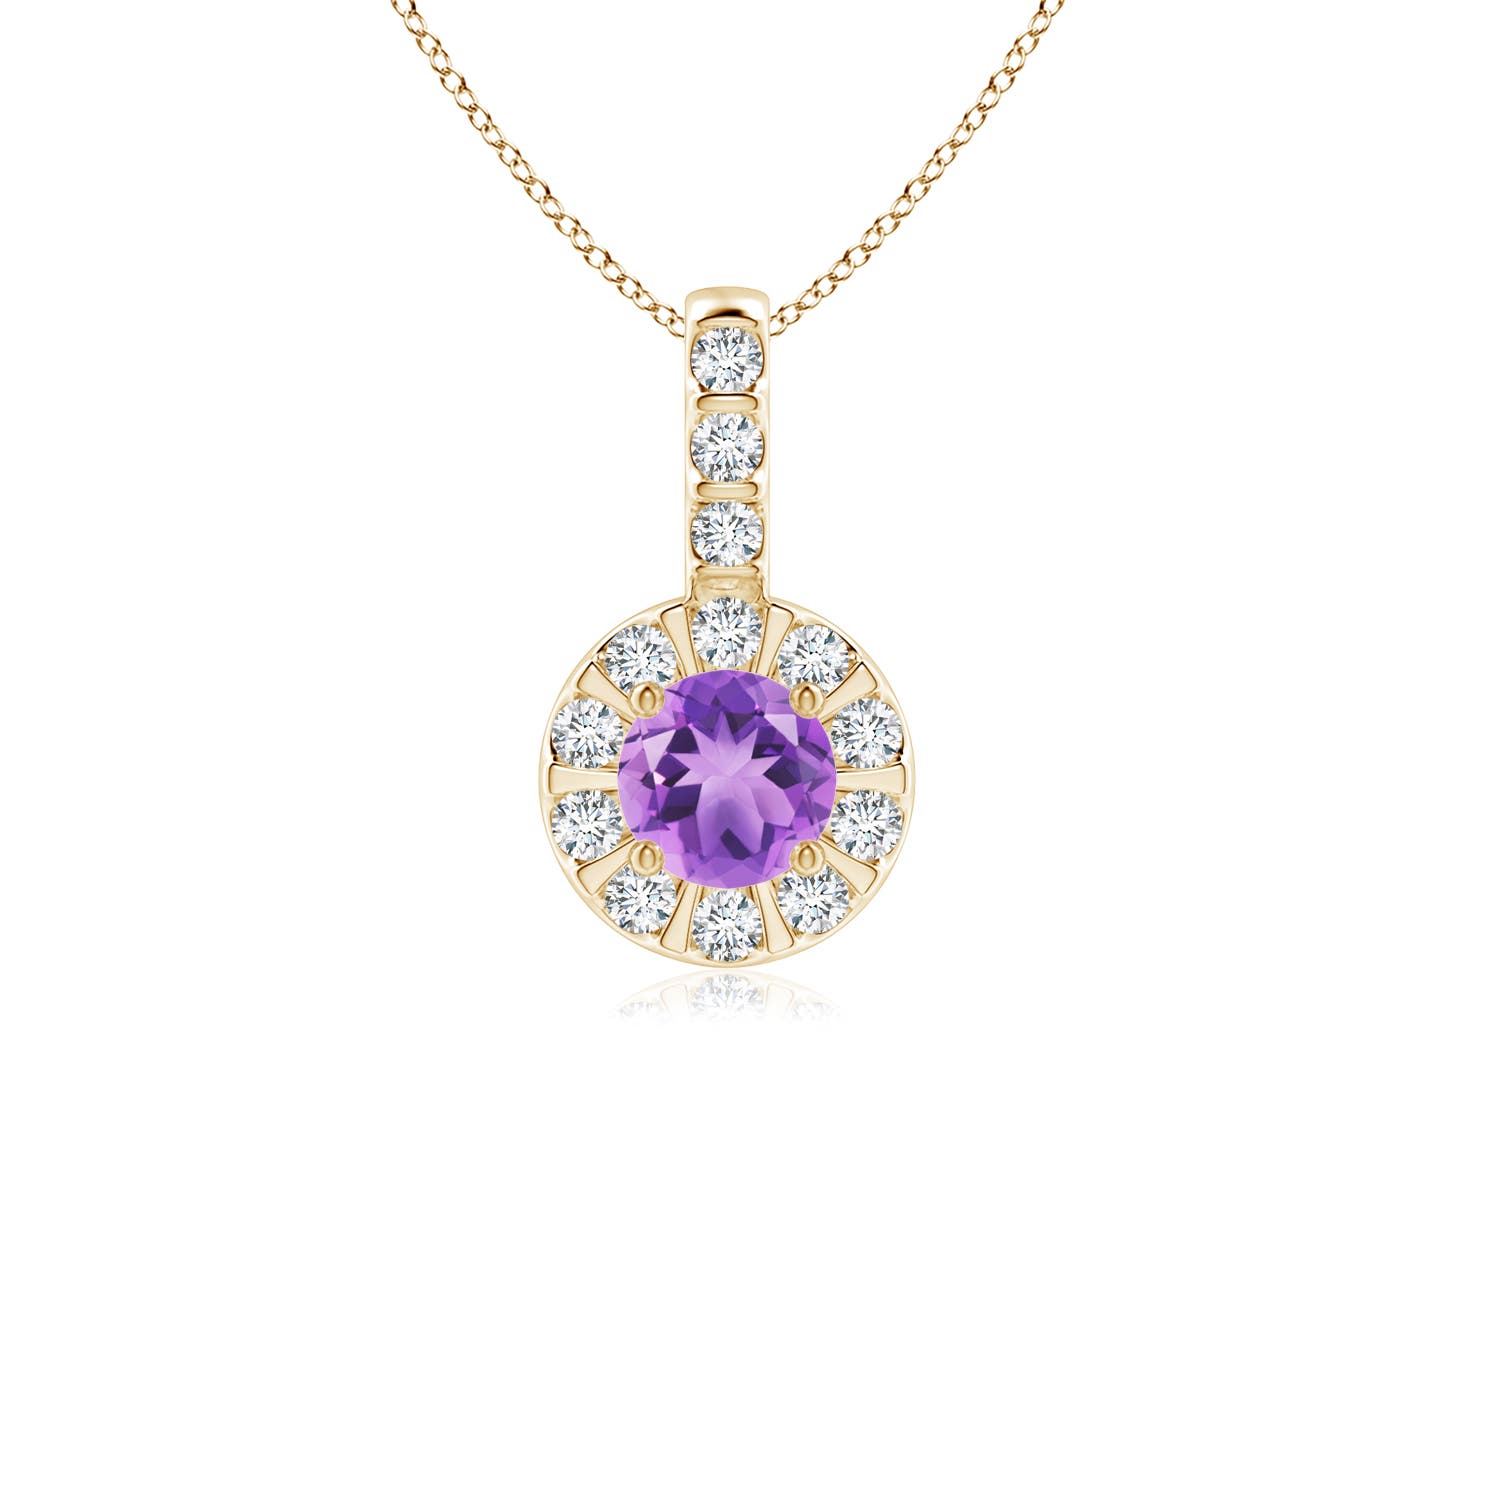 A - Amethyst / 0.38 CT / 14 KT Yellow Gold